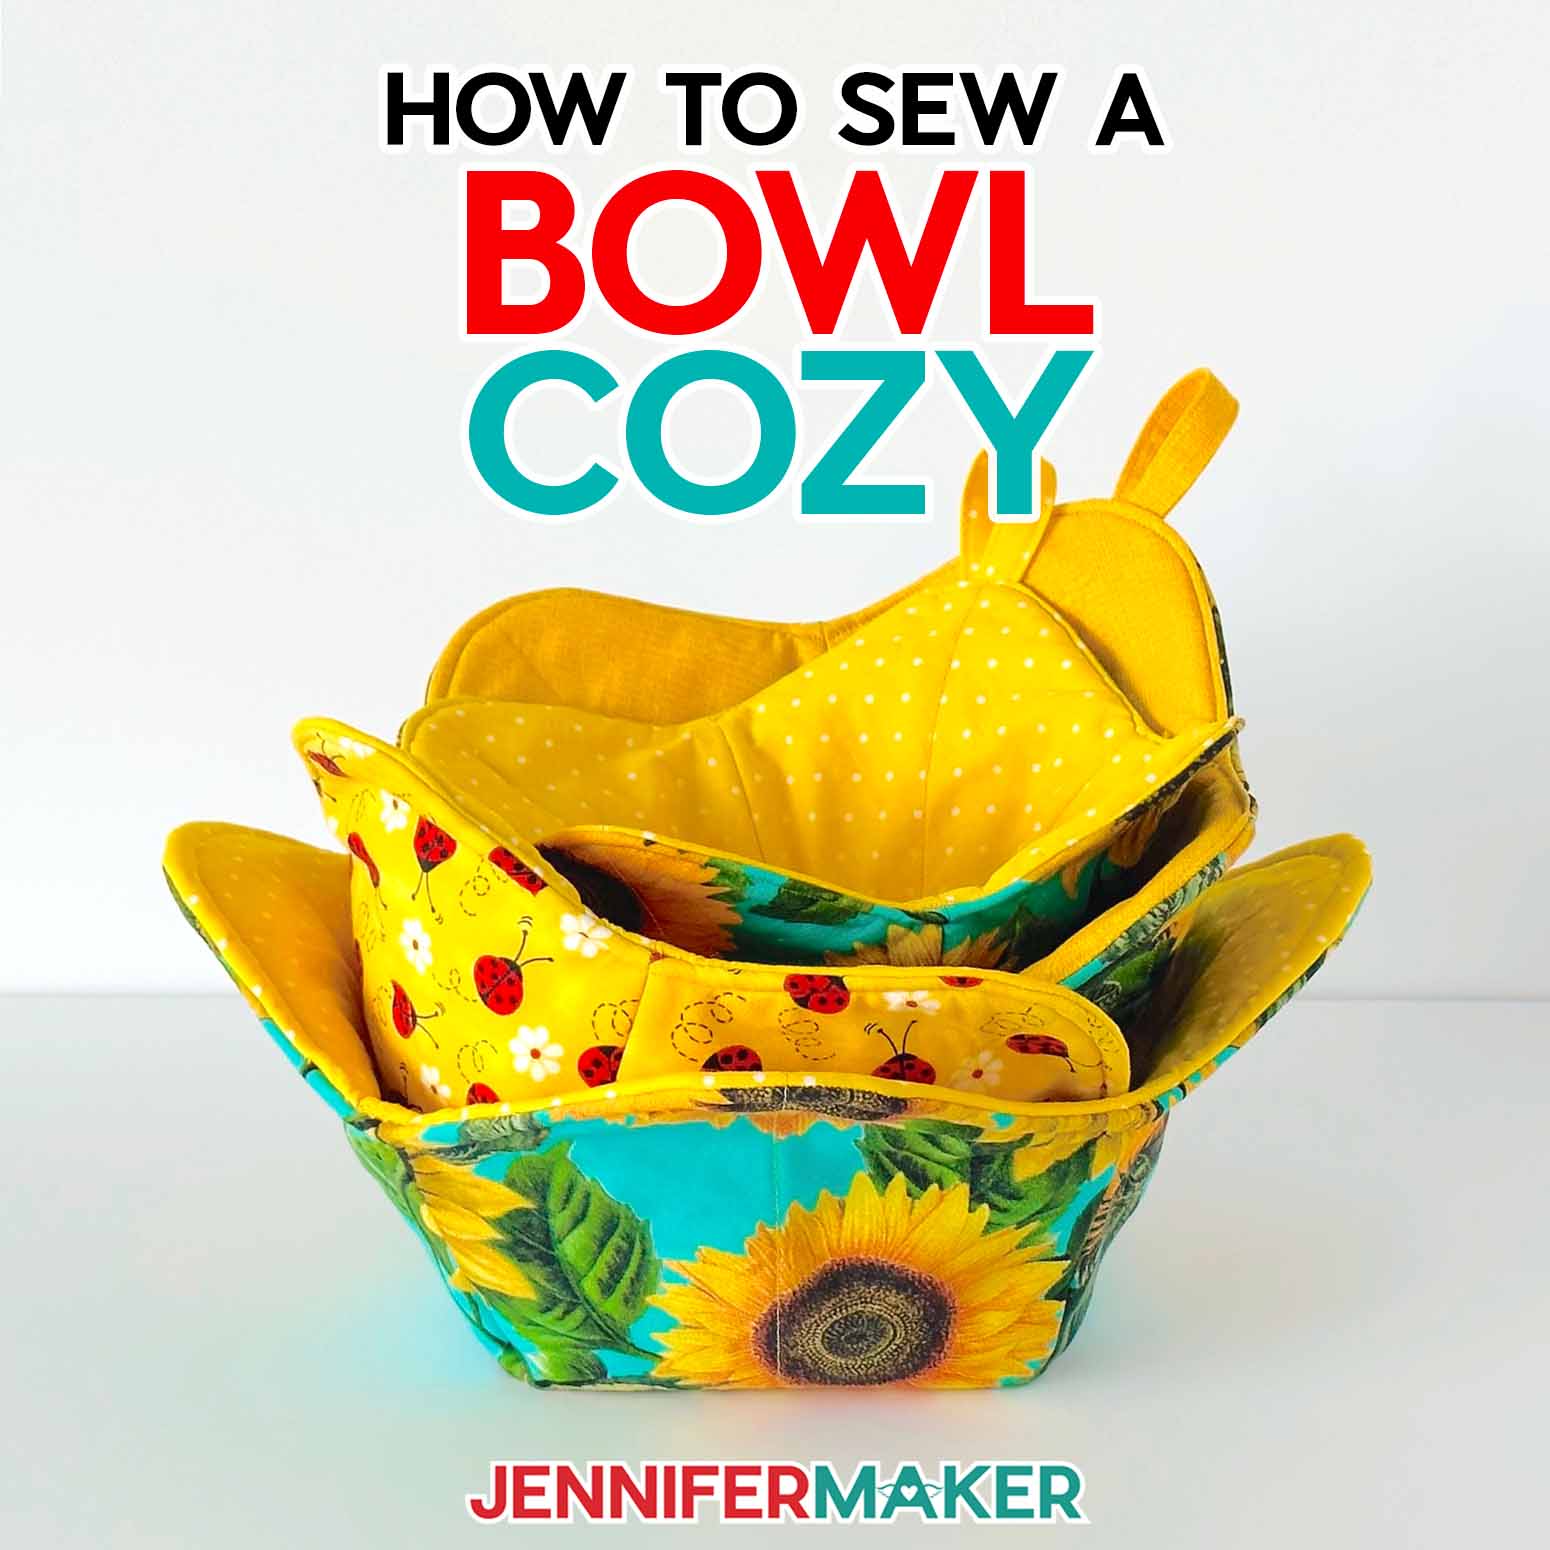 Learn How to Sew a Bowl Cozy with JenniferMaker's tutorial! Four brightly colored fabric bowl cozies with sunflowers, ladybugs, and yellow polka dot fabric sit on a white background.